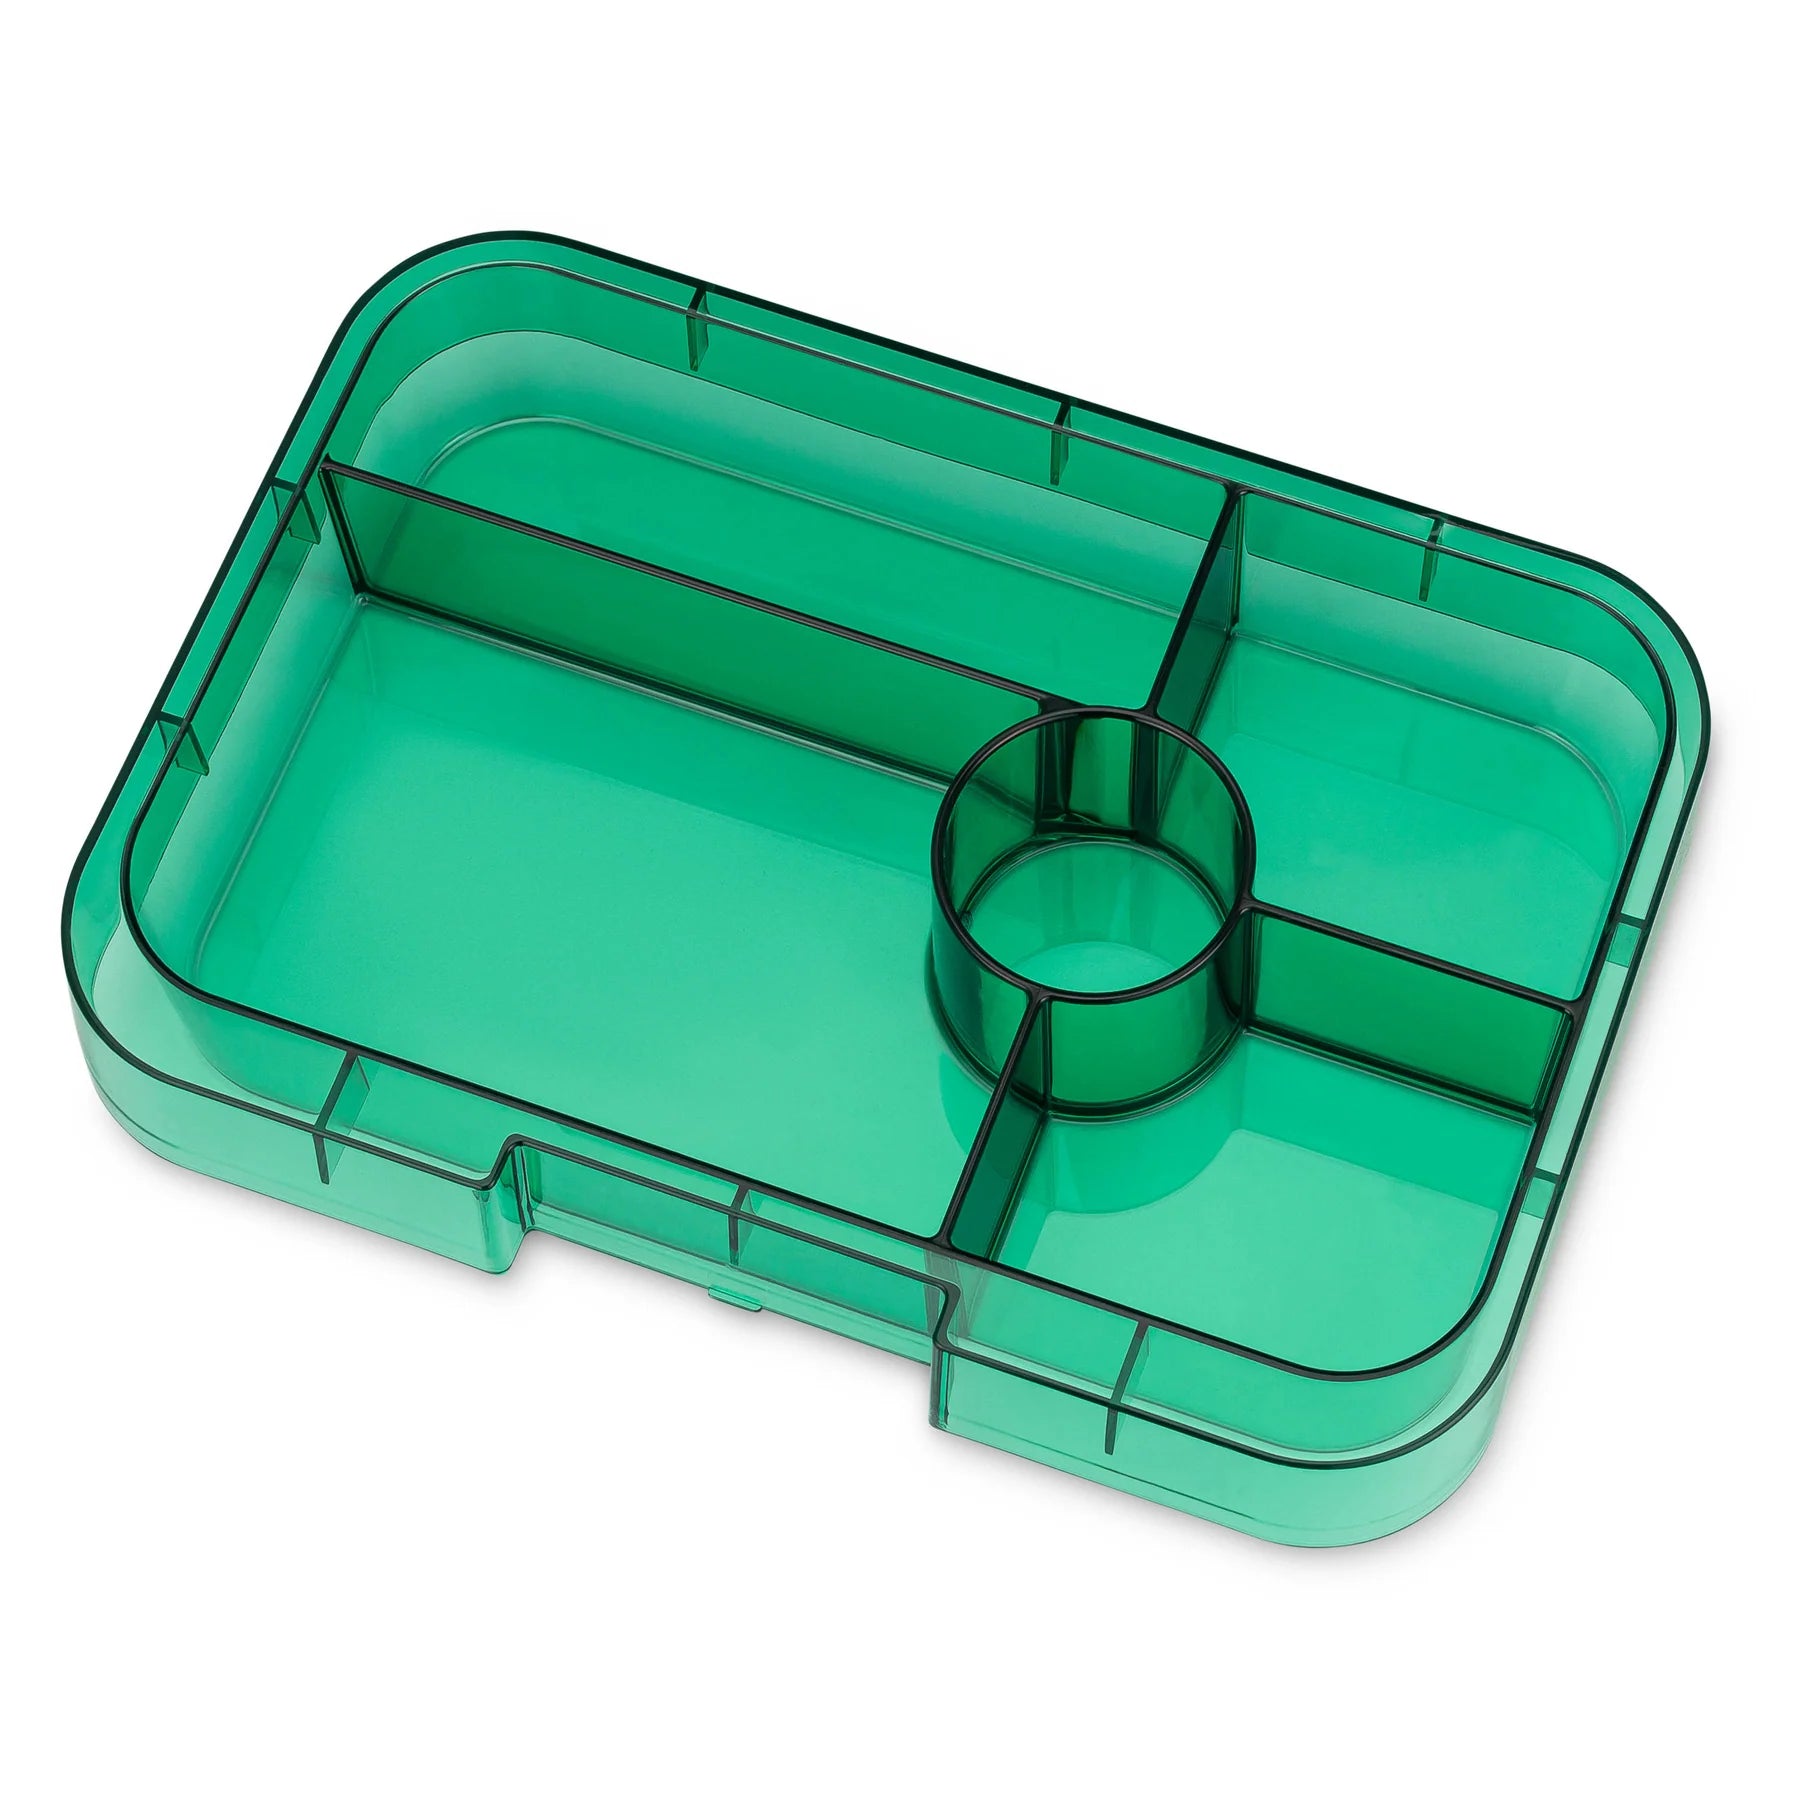 Yumbox Tapas 5-Compartment Food Tray - Greenwich Green/Clear Green 3